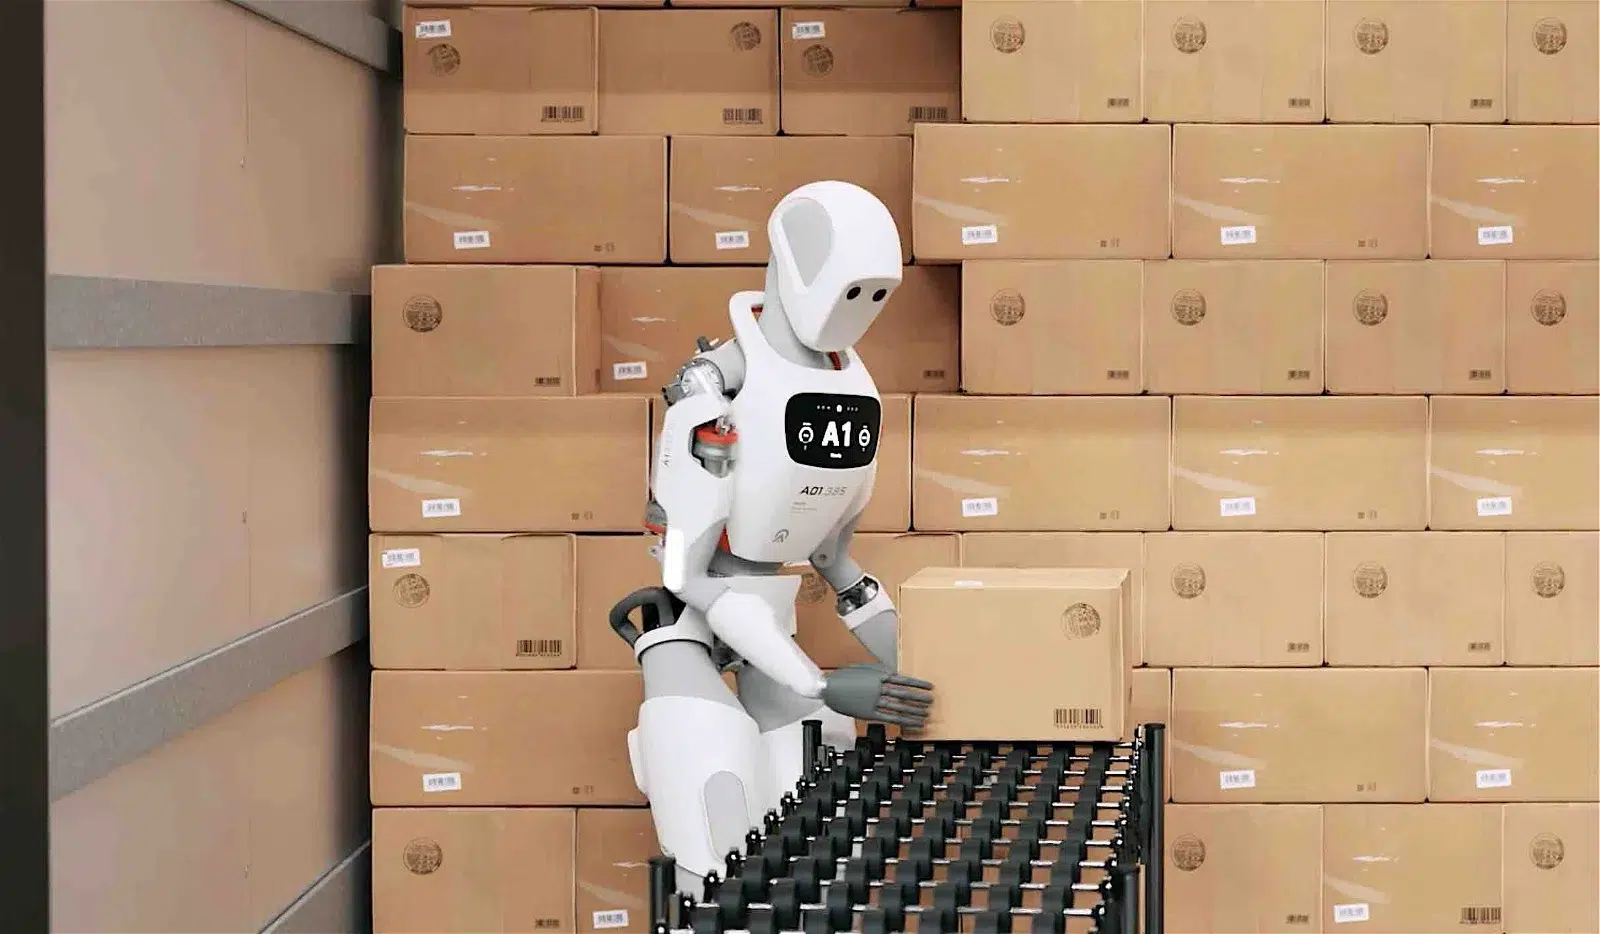 Apptronik has unveiled Apollo, a humanoid robot designed to work alongside humans in warehouses.